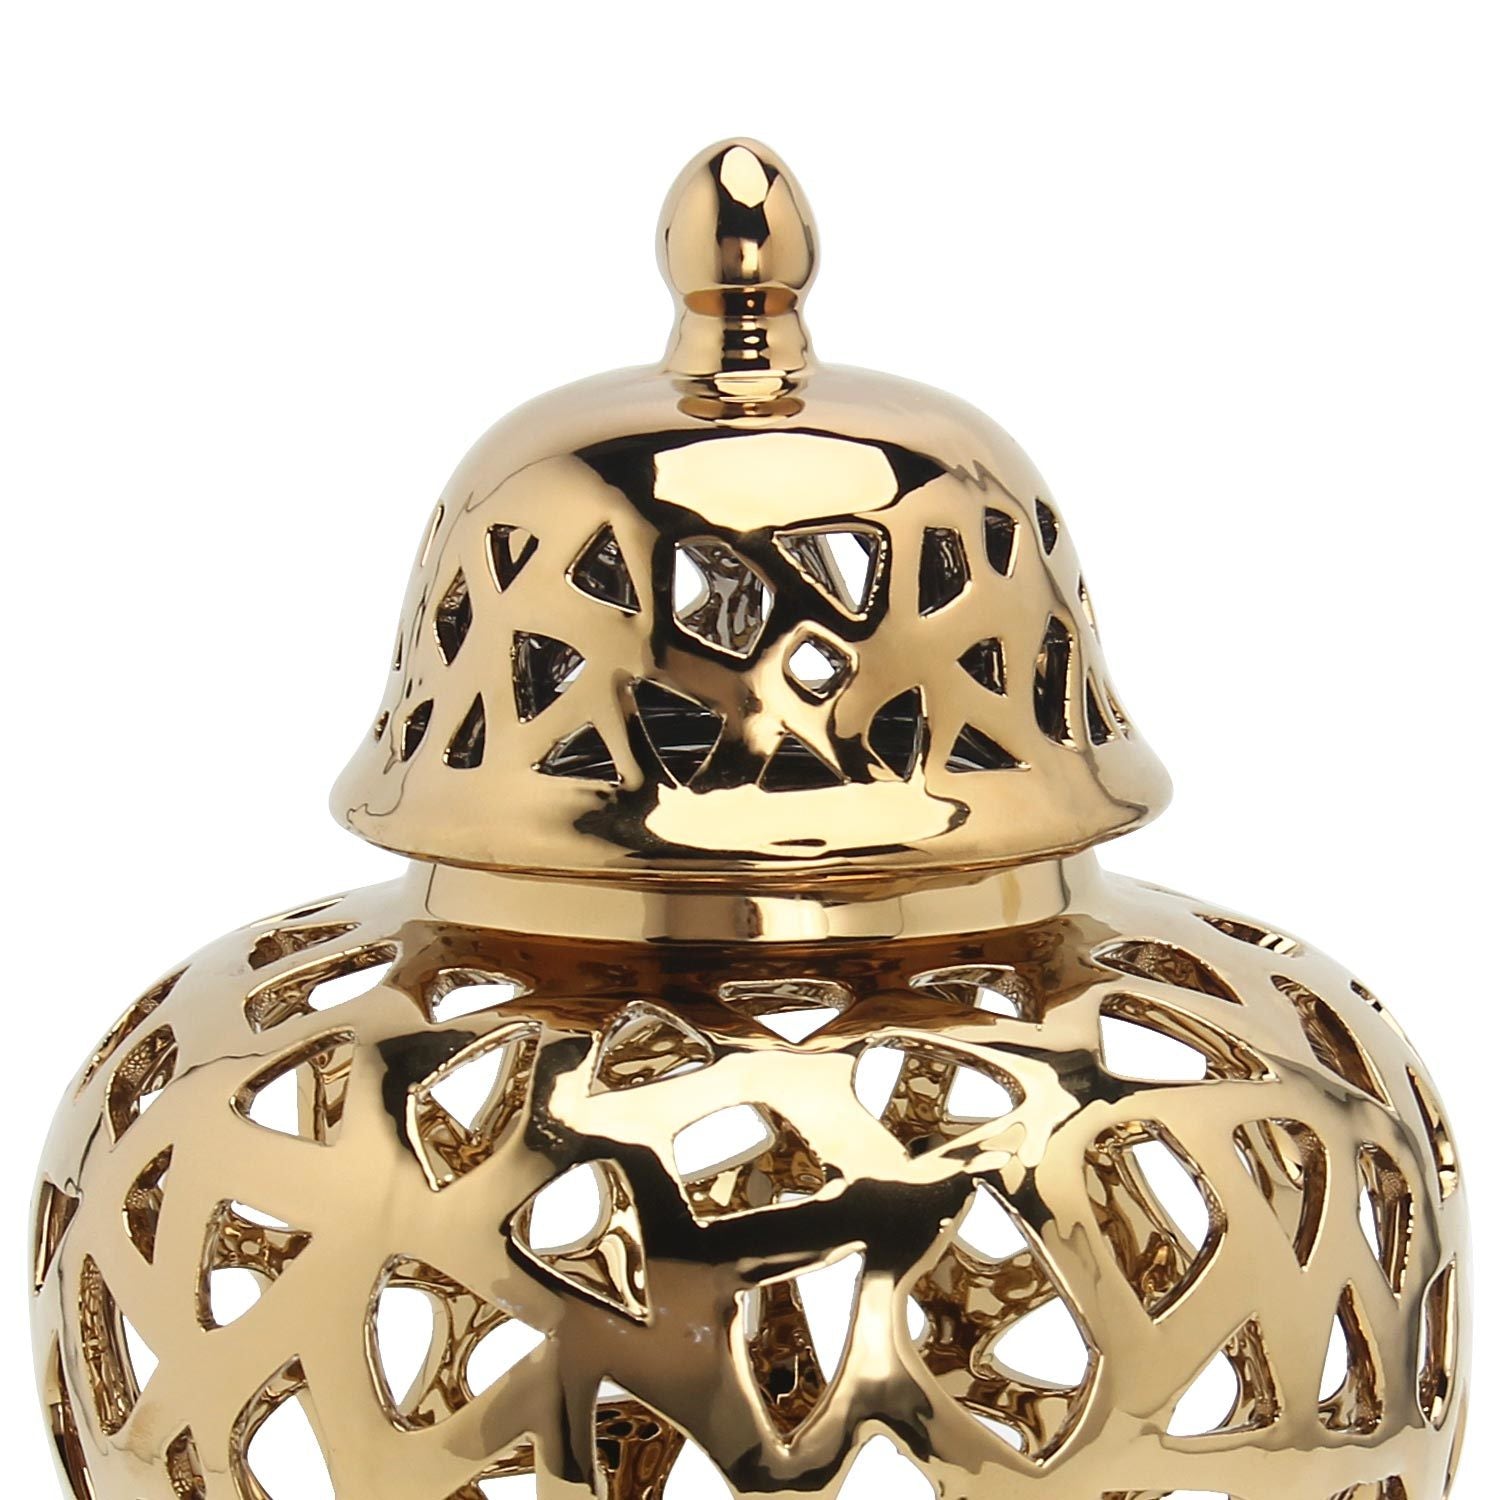 A golden, intricately pierced Gold Ceramic Ginger Jar Vase with Decorative Design with a removable lid, isolated on a white background, perfect for interior design.